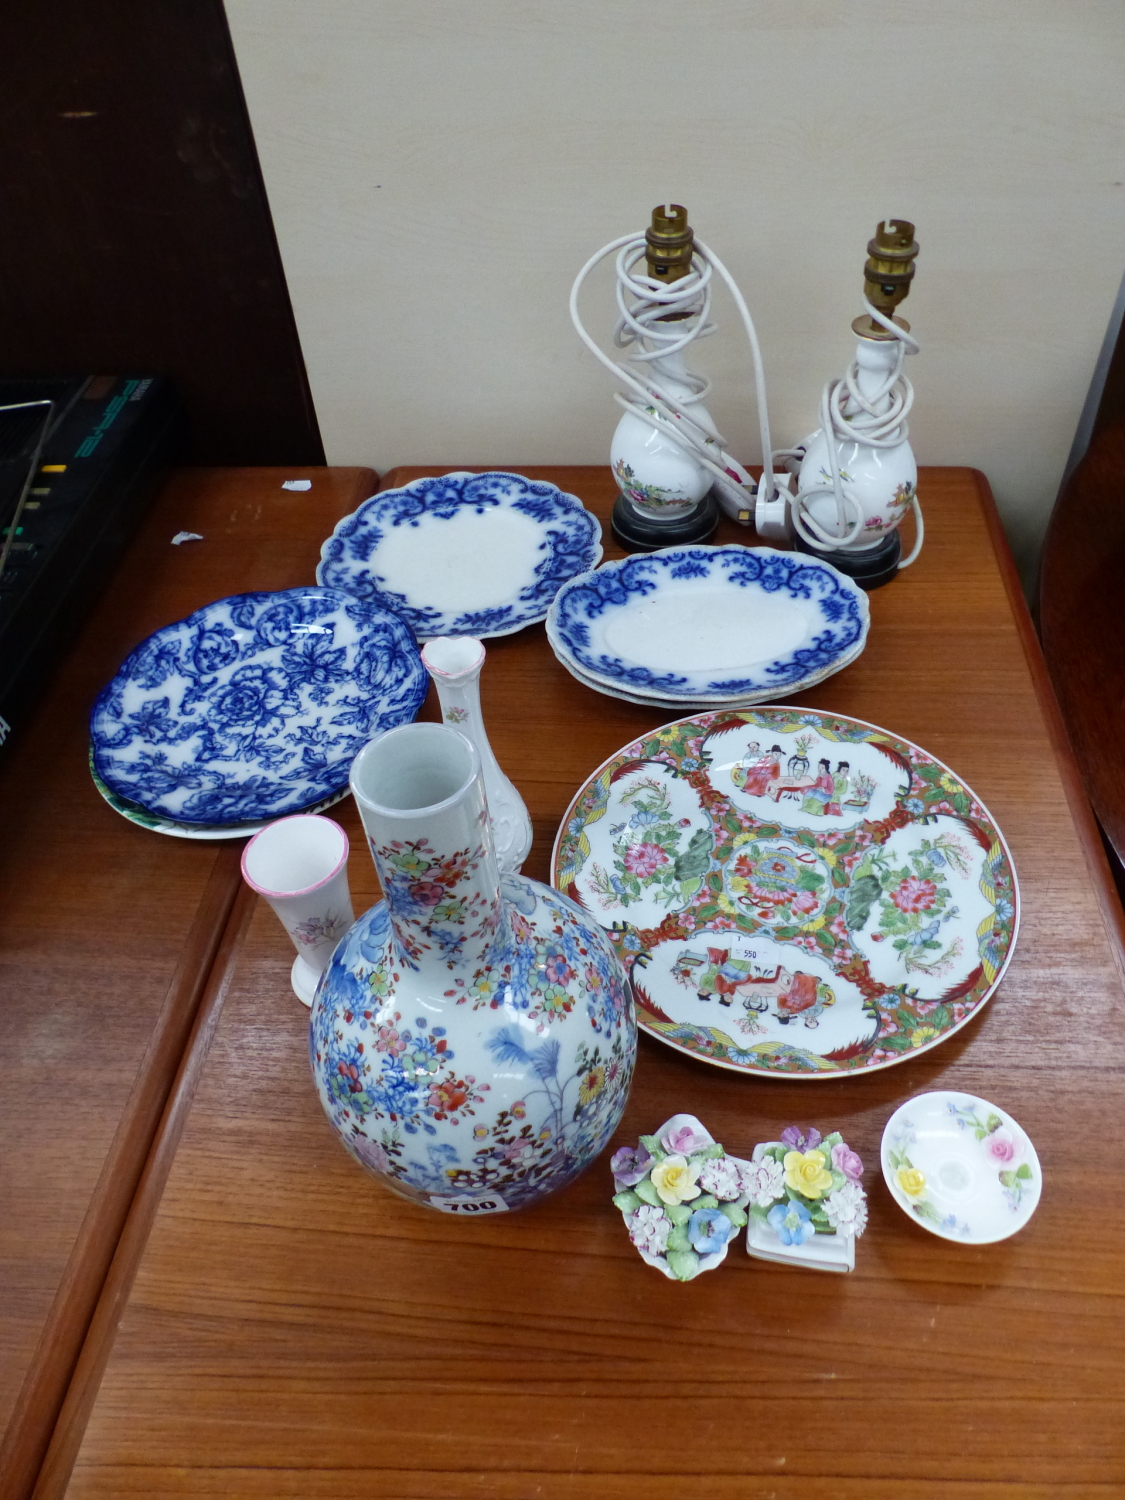 AN ORIENTAL BOTTLE FORM VASE, VARIOUS PLATES, ROYAL DOULTON AND ADDERLEY PORCELAIN POSIES, A PAIR OF